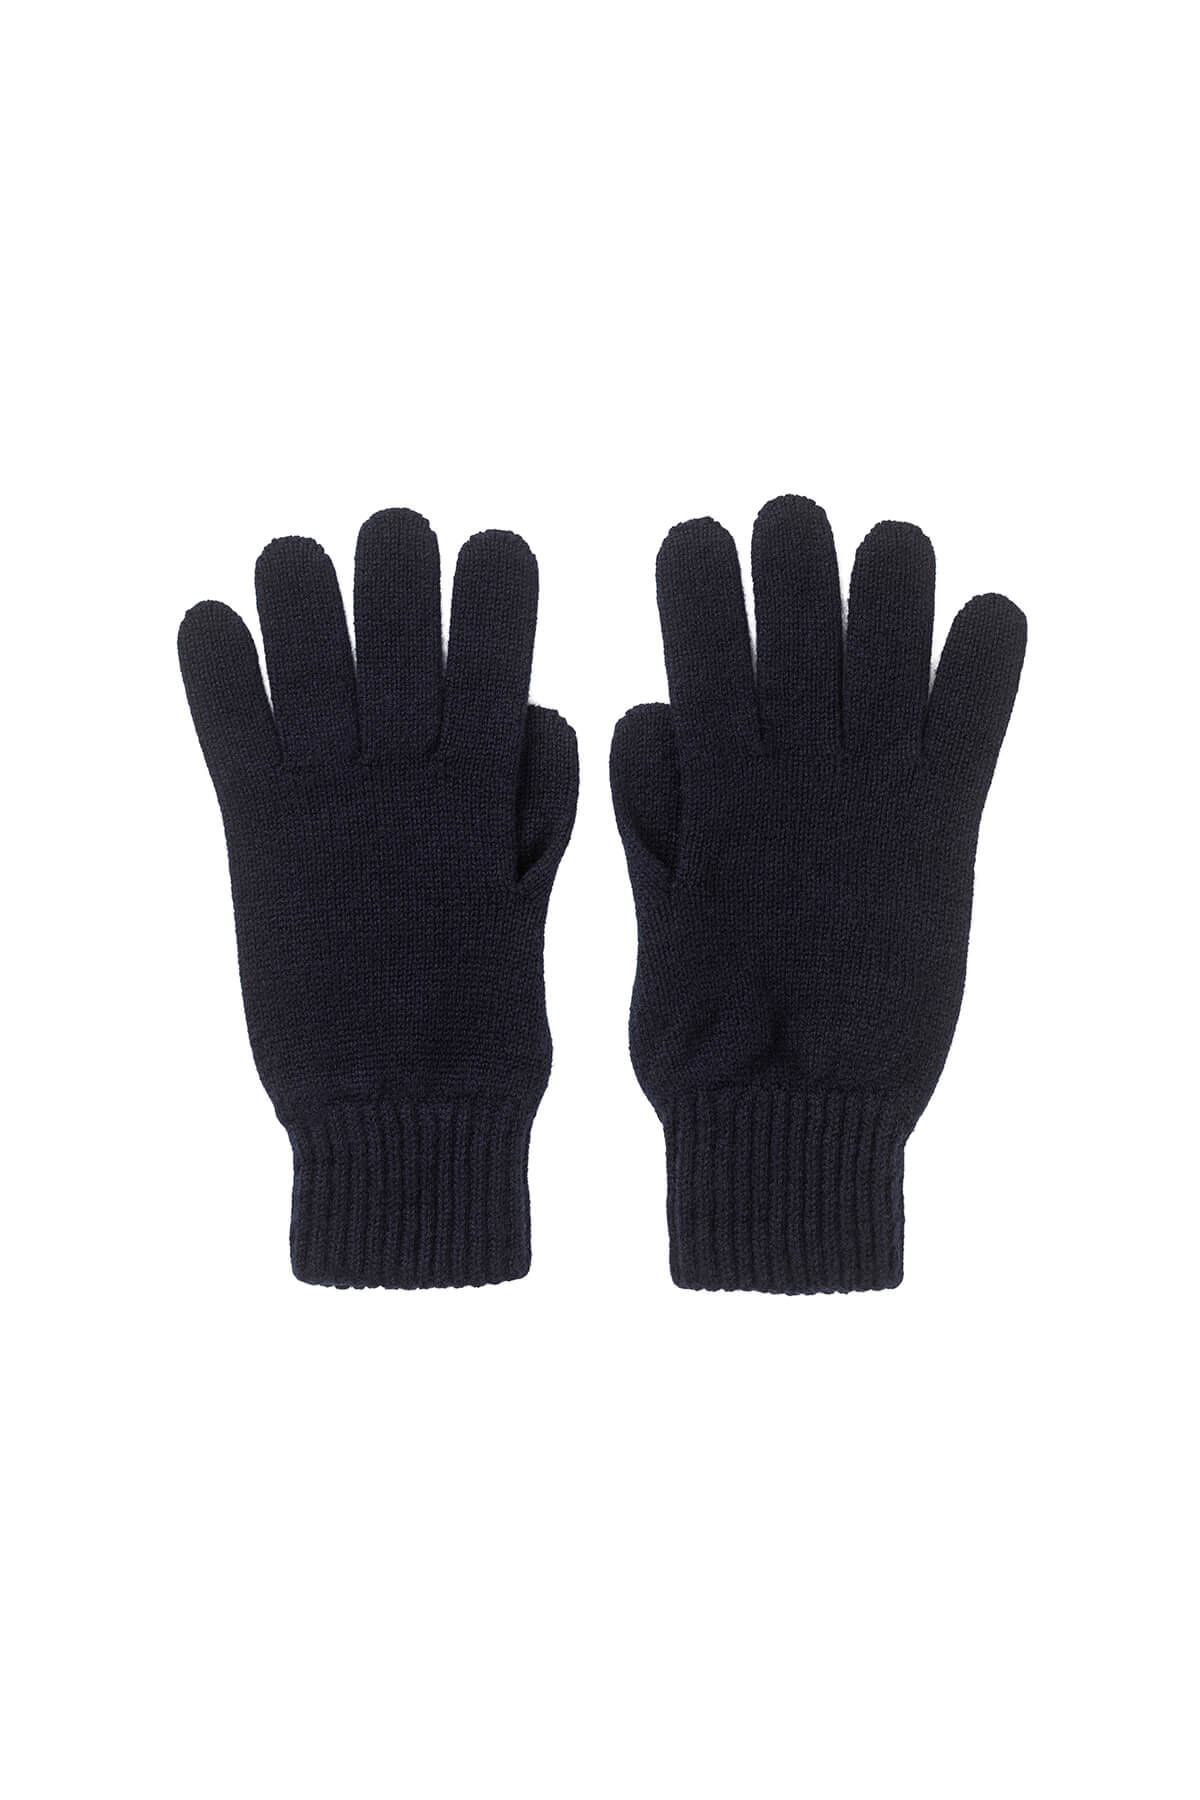 Johnstons of Elgin Men's Cashmere Accessories Gift Set Navy Gloves on a white background 365GIFTSET6D